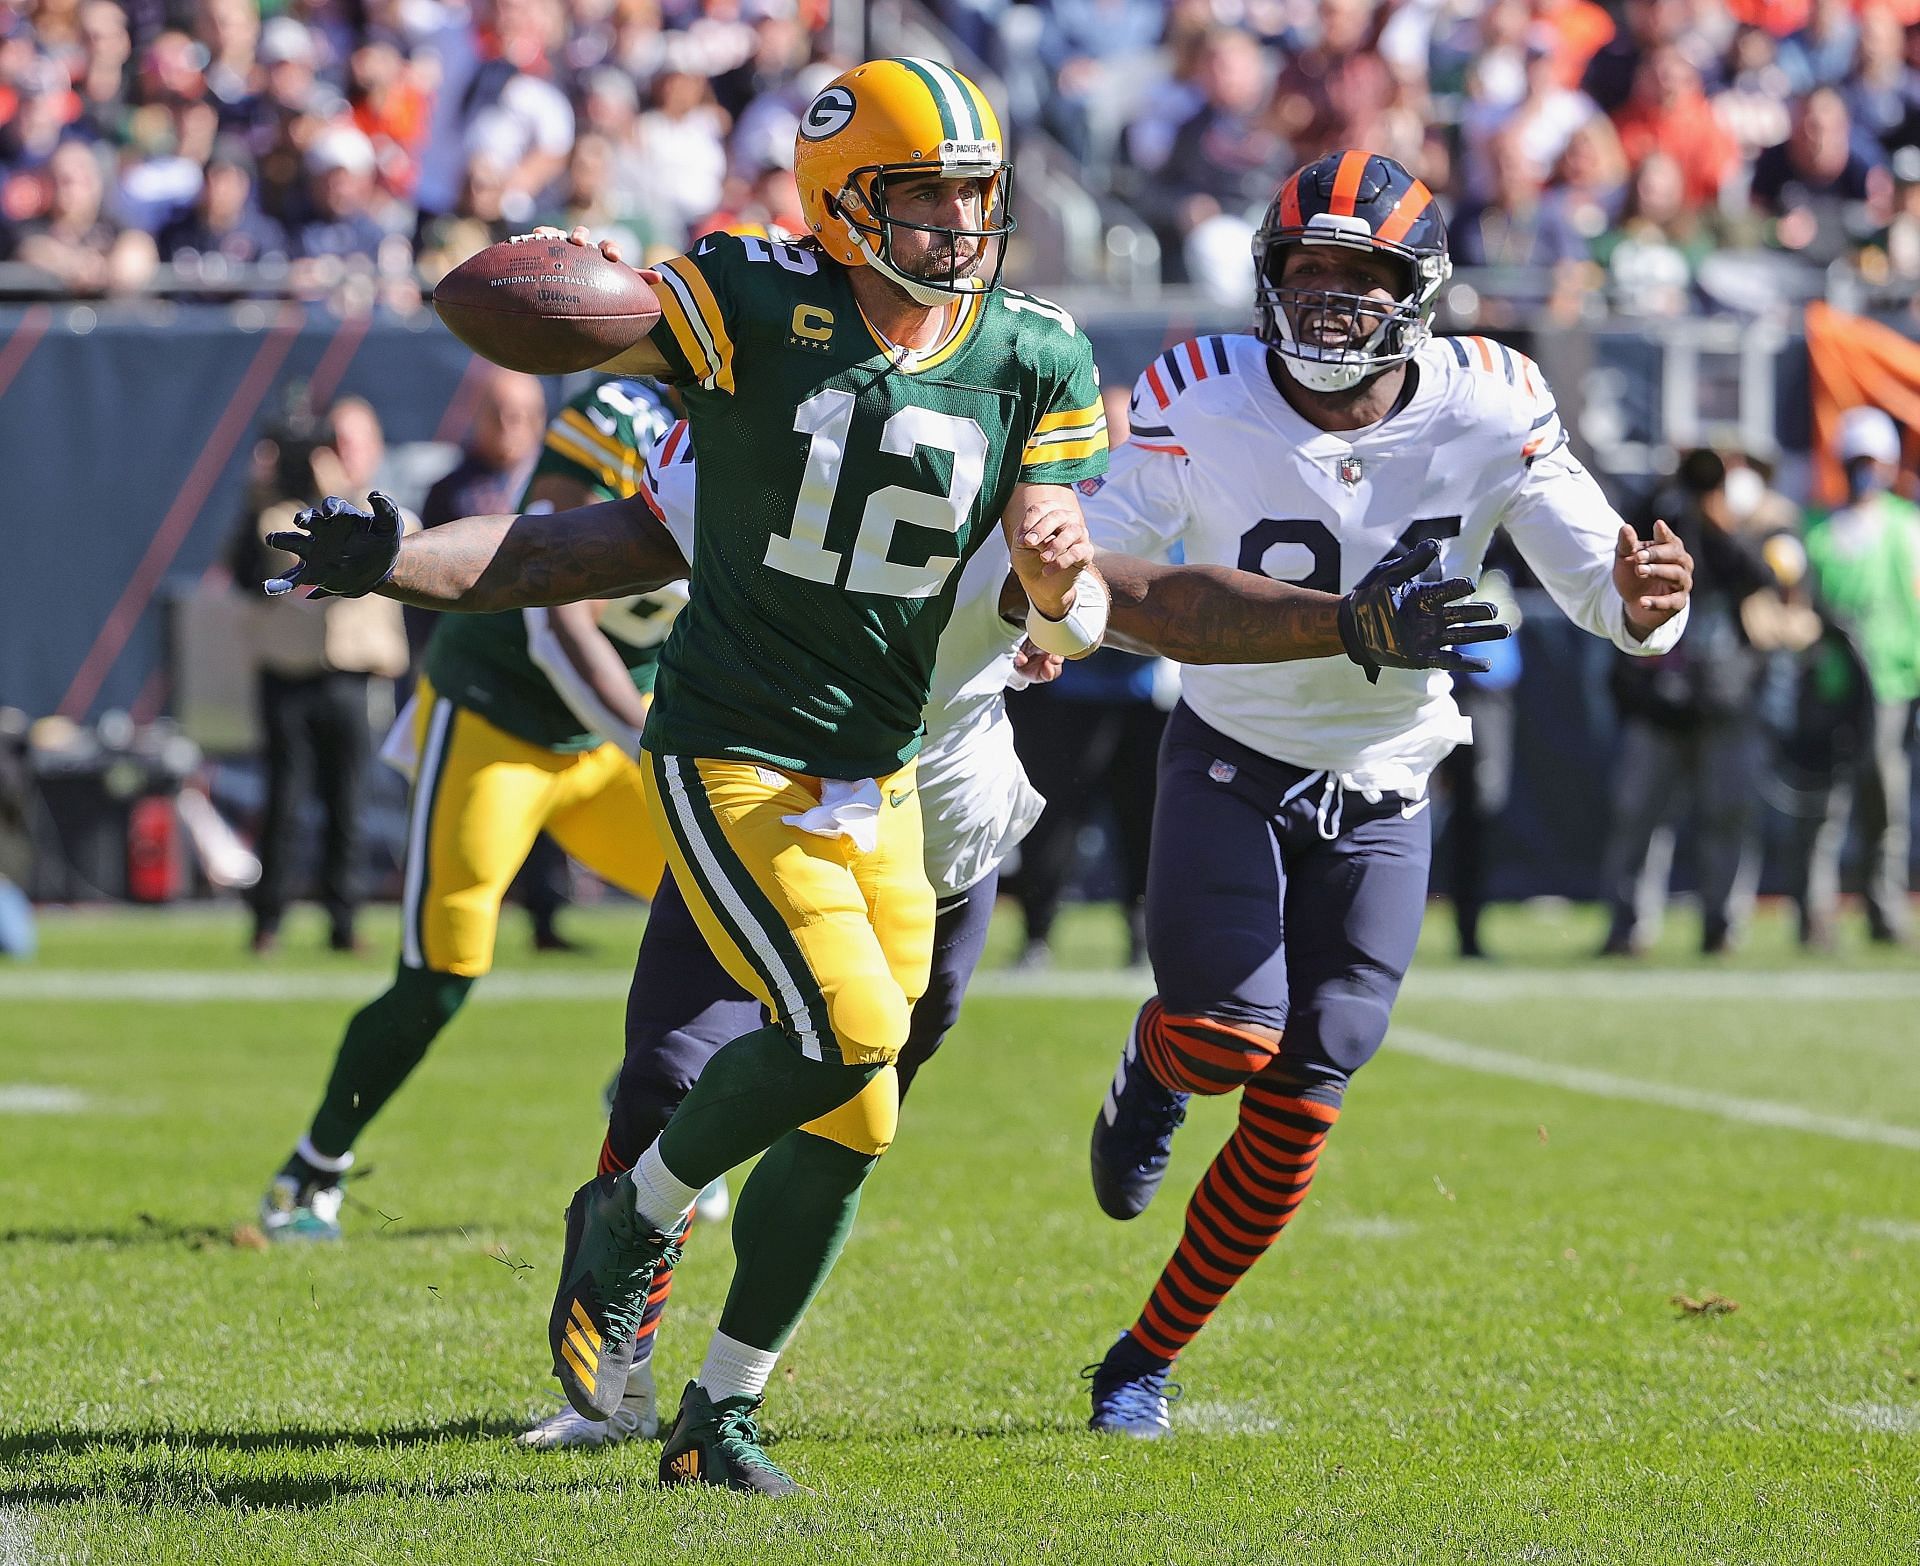 Green Bay Packers quarterback Aaron Rodgers vs. Chicago Bears